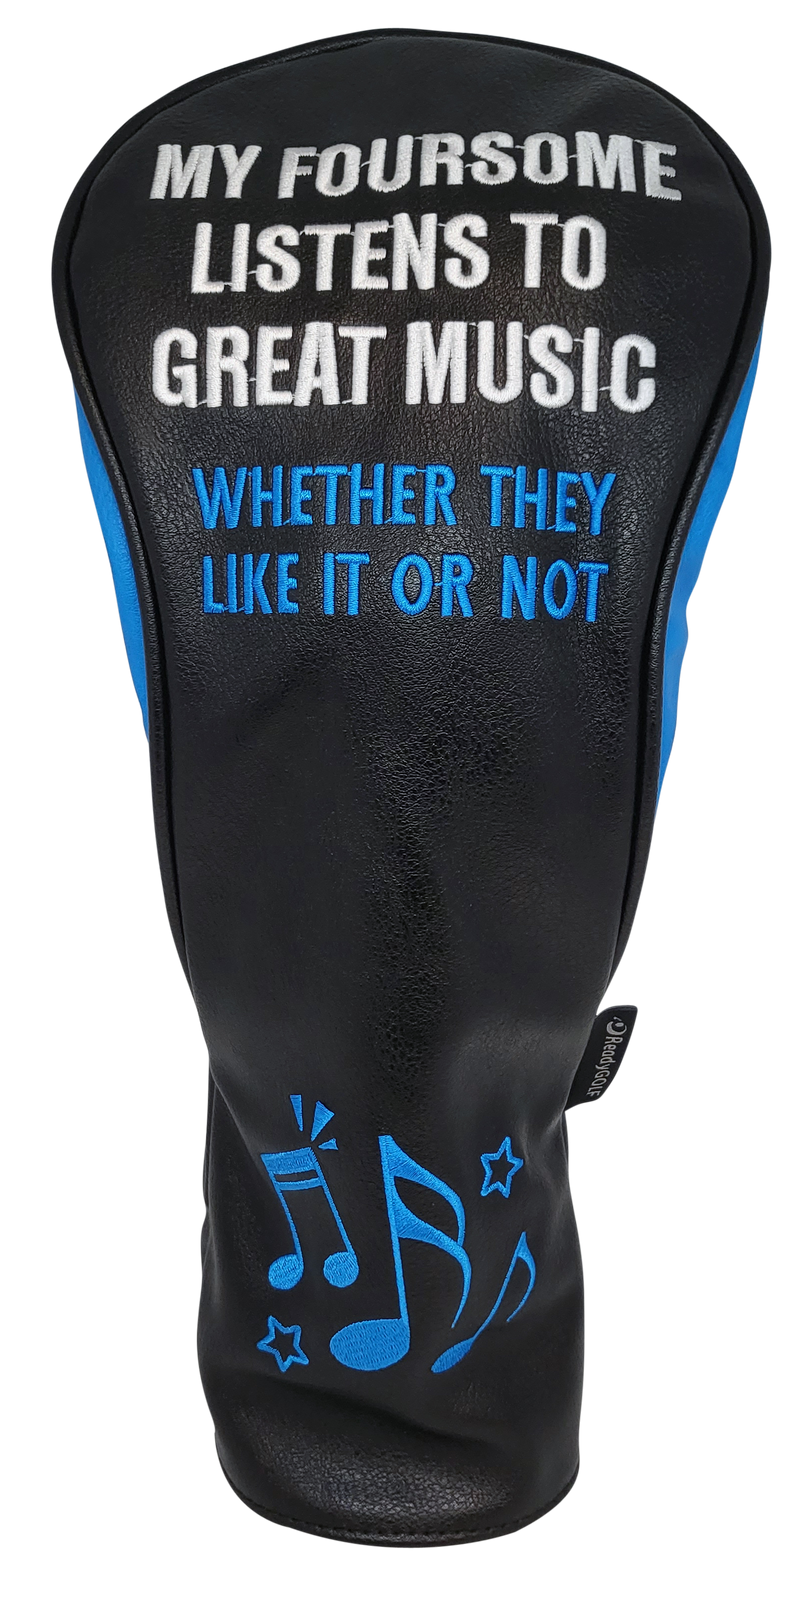 My Foursome Listens To Great Music (Whether They Like It or Not) Embroidered Driver Headcover by ReadyGOLF